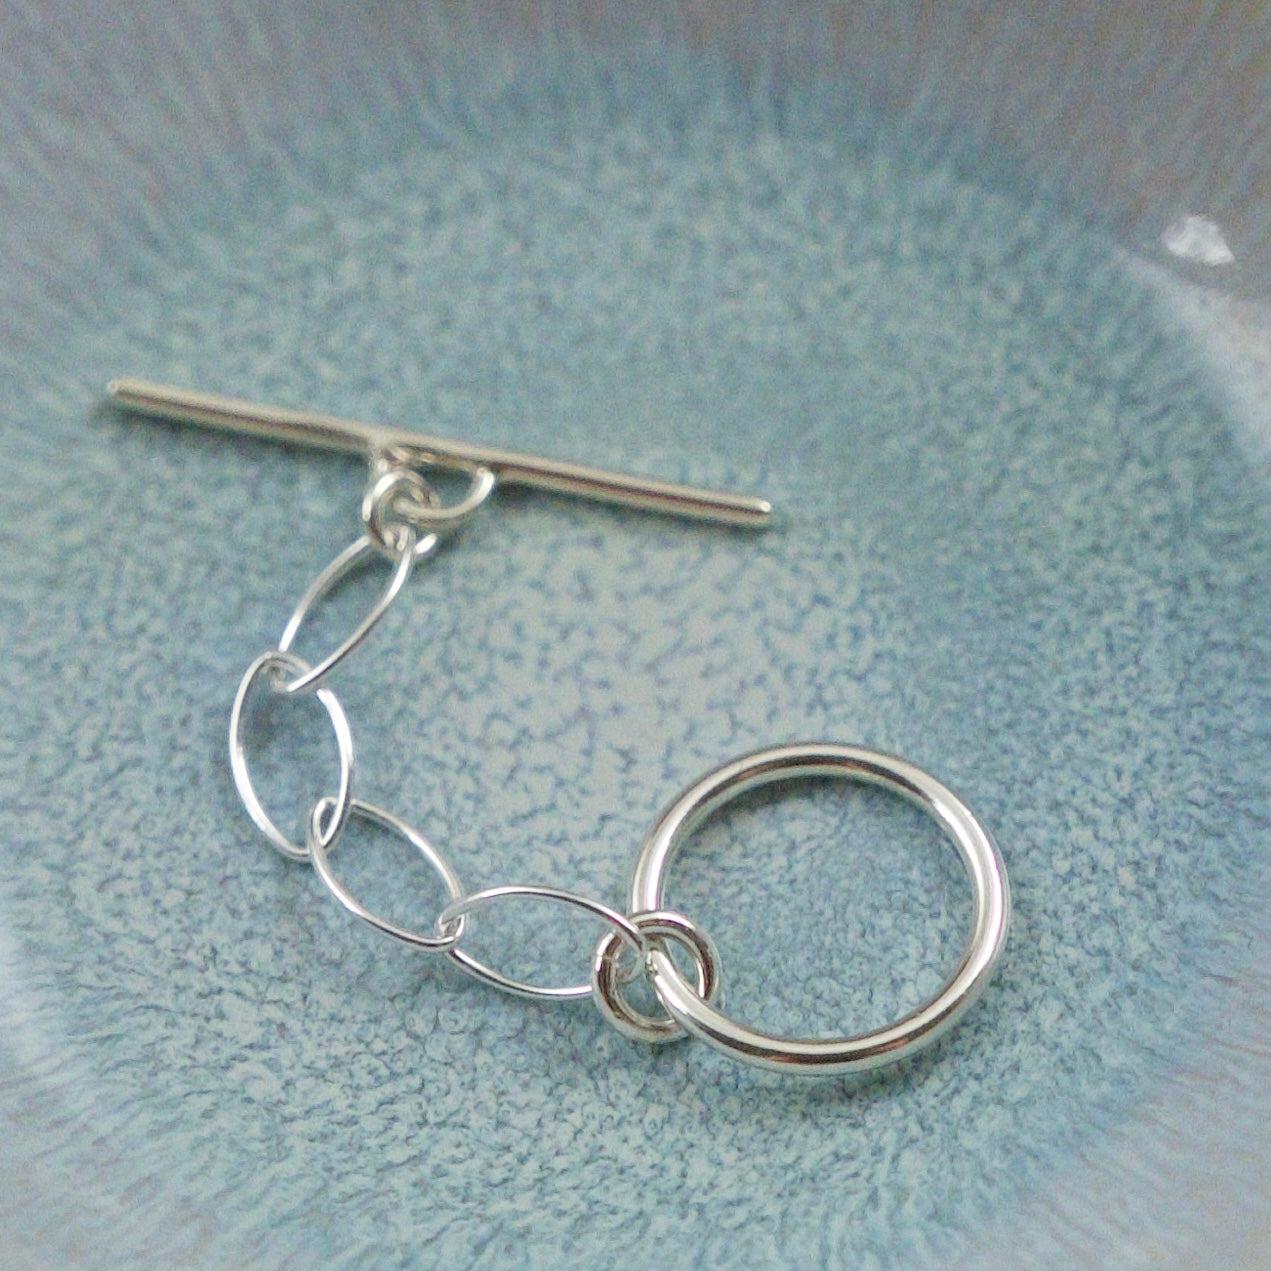 Large Sterling silver toggle clasp necklace extender extension 2